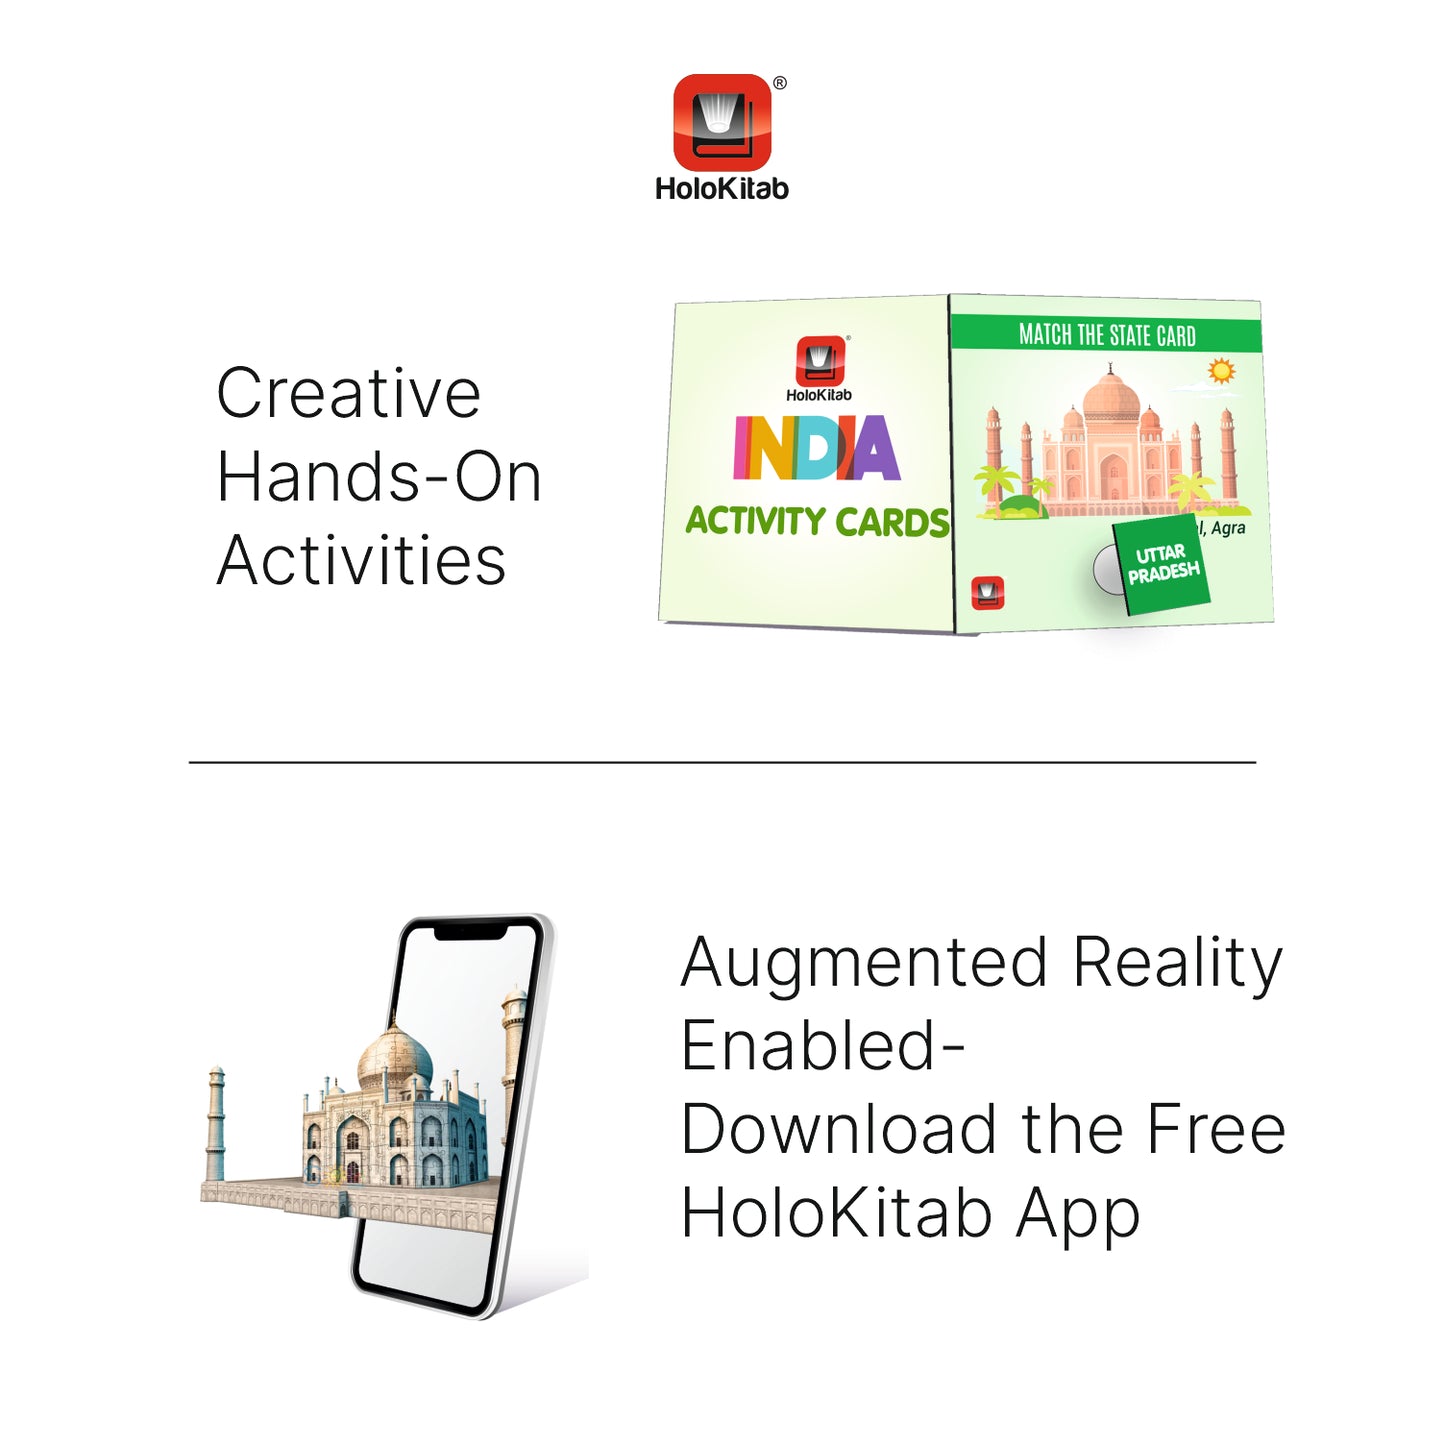 HoloKitab Combo Know my India Smart Learning Kit for Kids. Learn about Indian Dances, Monuments, Festivals, States UTs & National Symbols | 120 Flashcards | Activity Cards | AR Enabled | 4- 14 Yrs